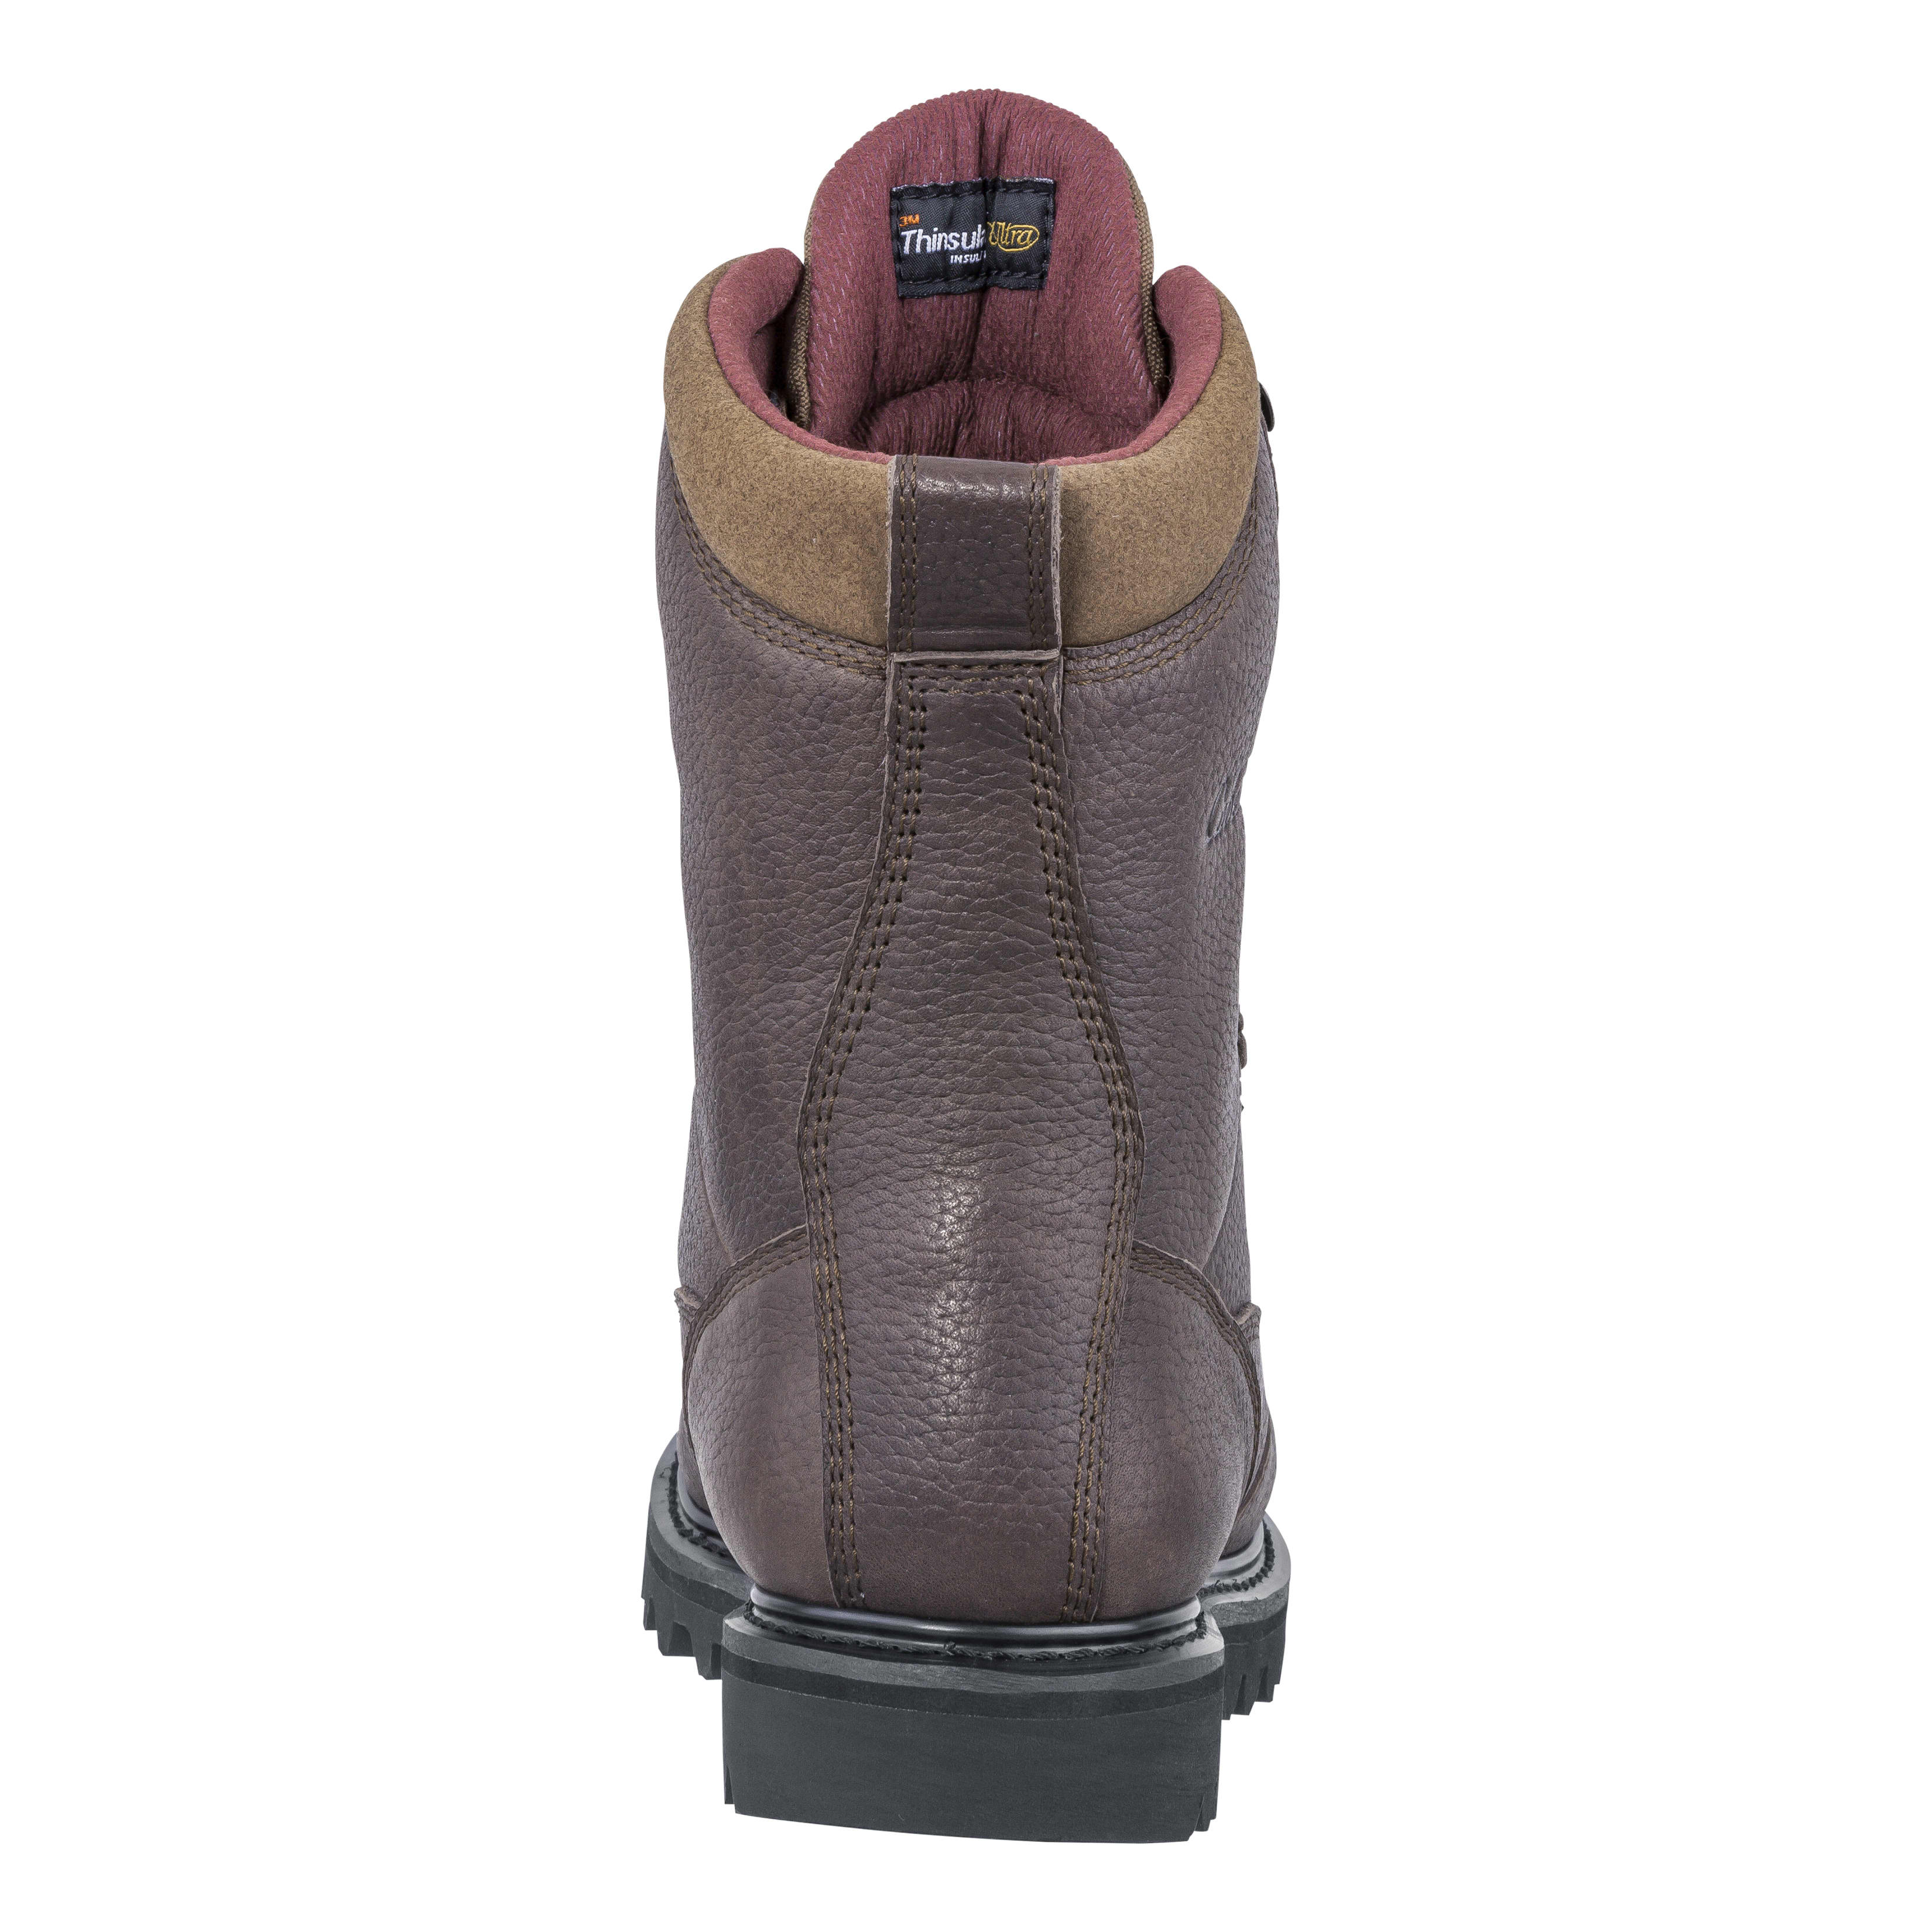 Cabela's Men's Iron Ridge® 400-gram Leather Hunting Boots - Back View